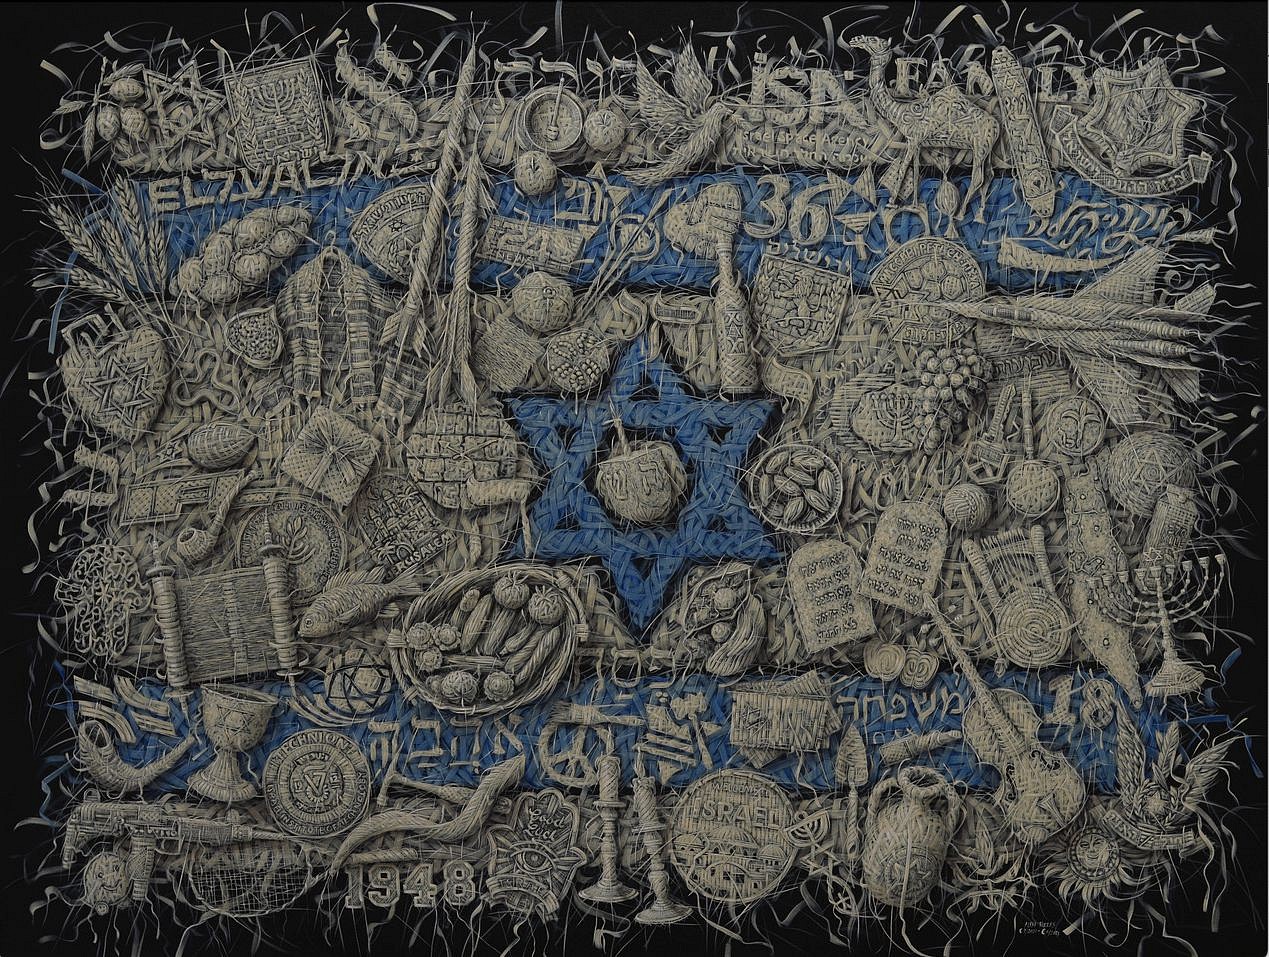 Alexi Torres, Israel, 2021
Oil on Canvas, 72 x 96 in.